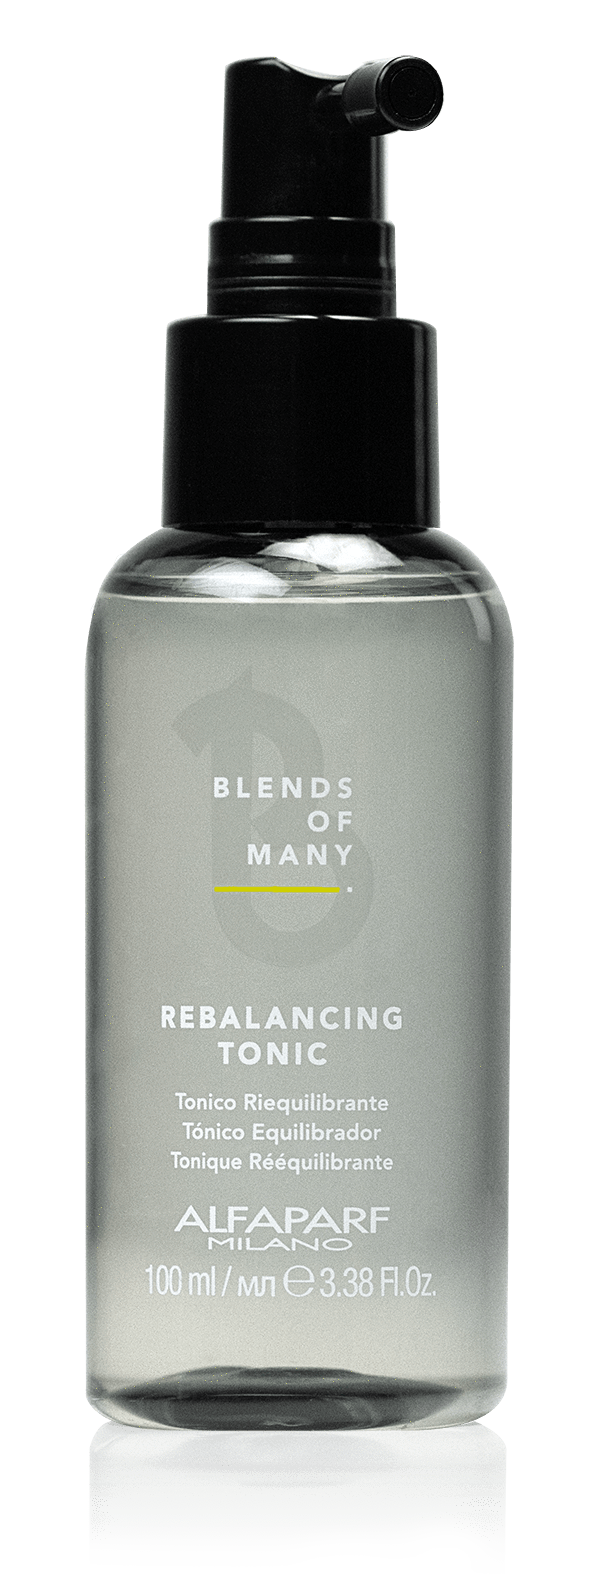 Alfaparf Milano Blends Of Many Rebalancing Tonic (100ml) best shampoo and conditioner for frizzy 